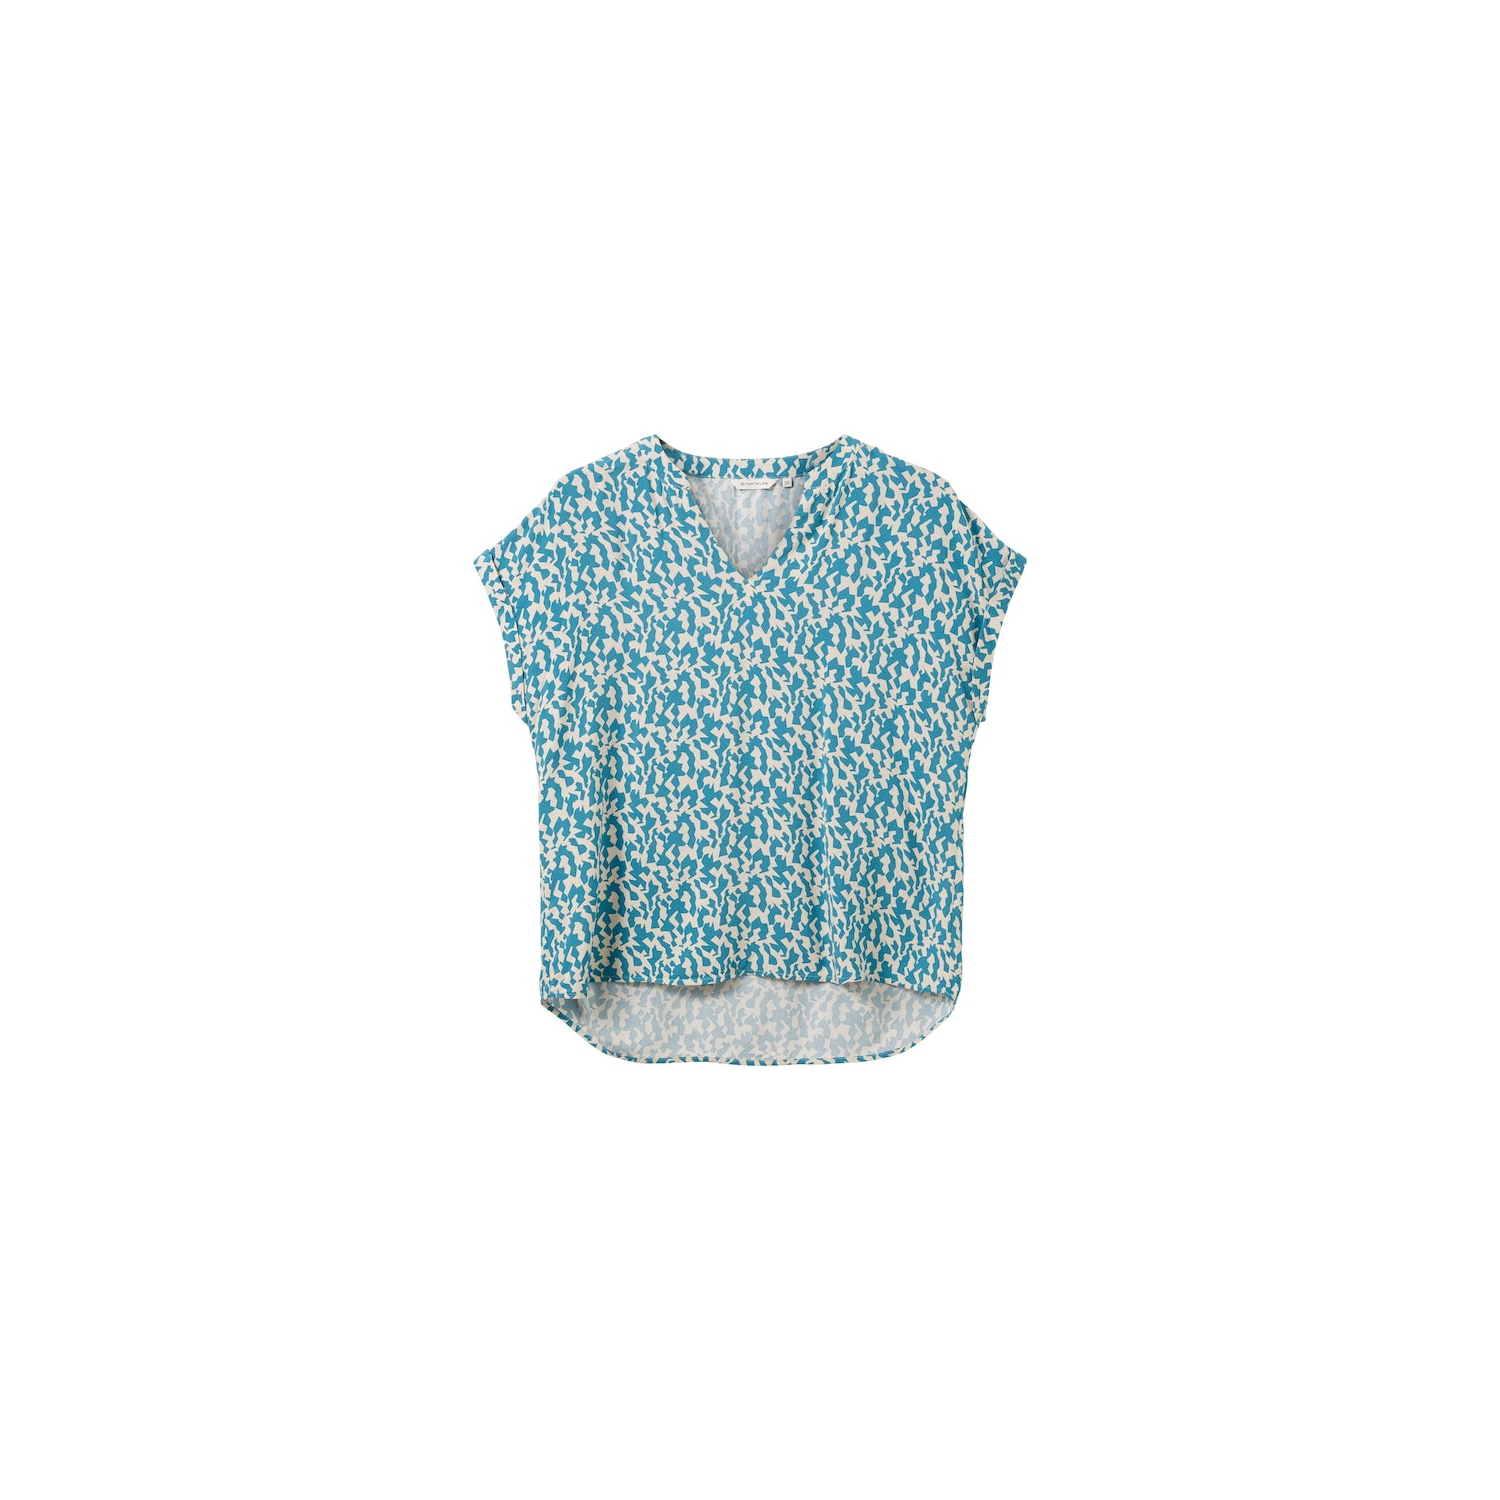 TOM TAILOR Kurzarm-Bluse petrol abstract small design, 25,00 €